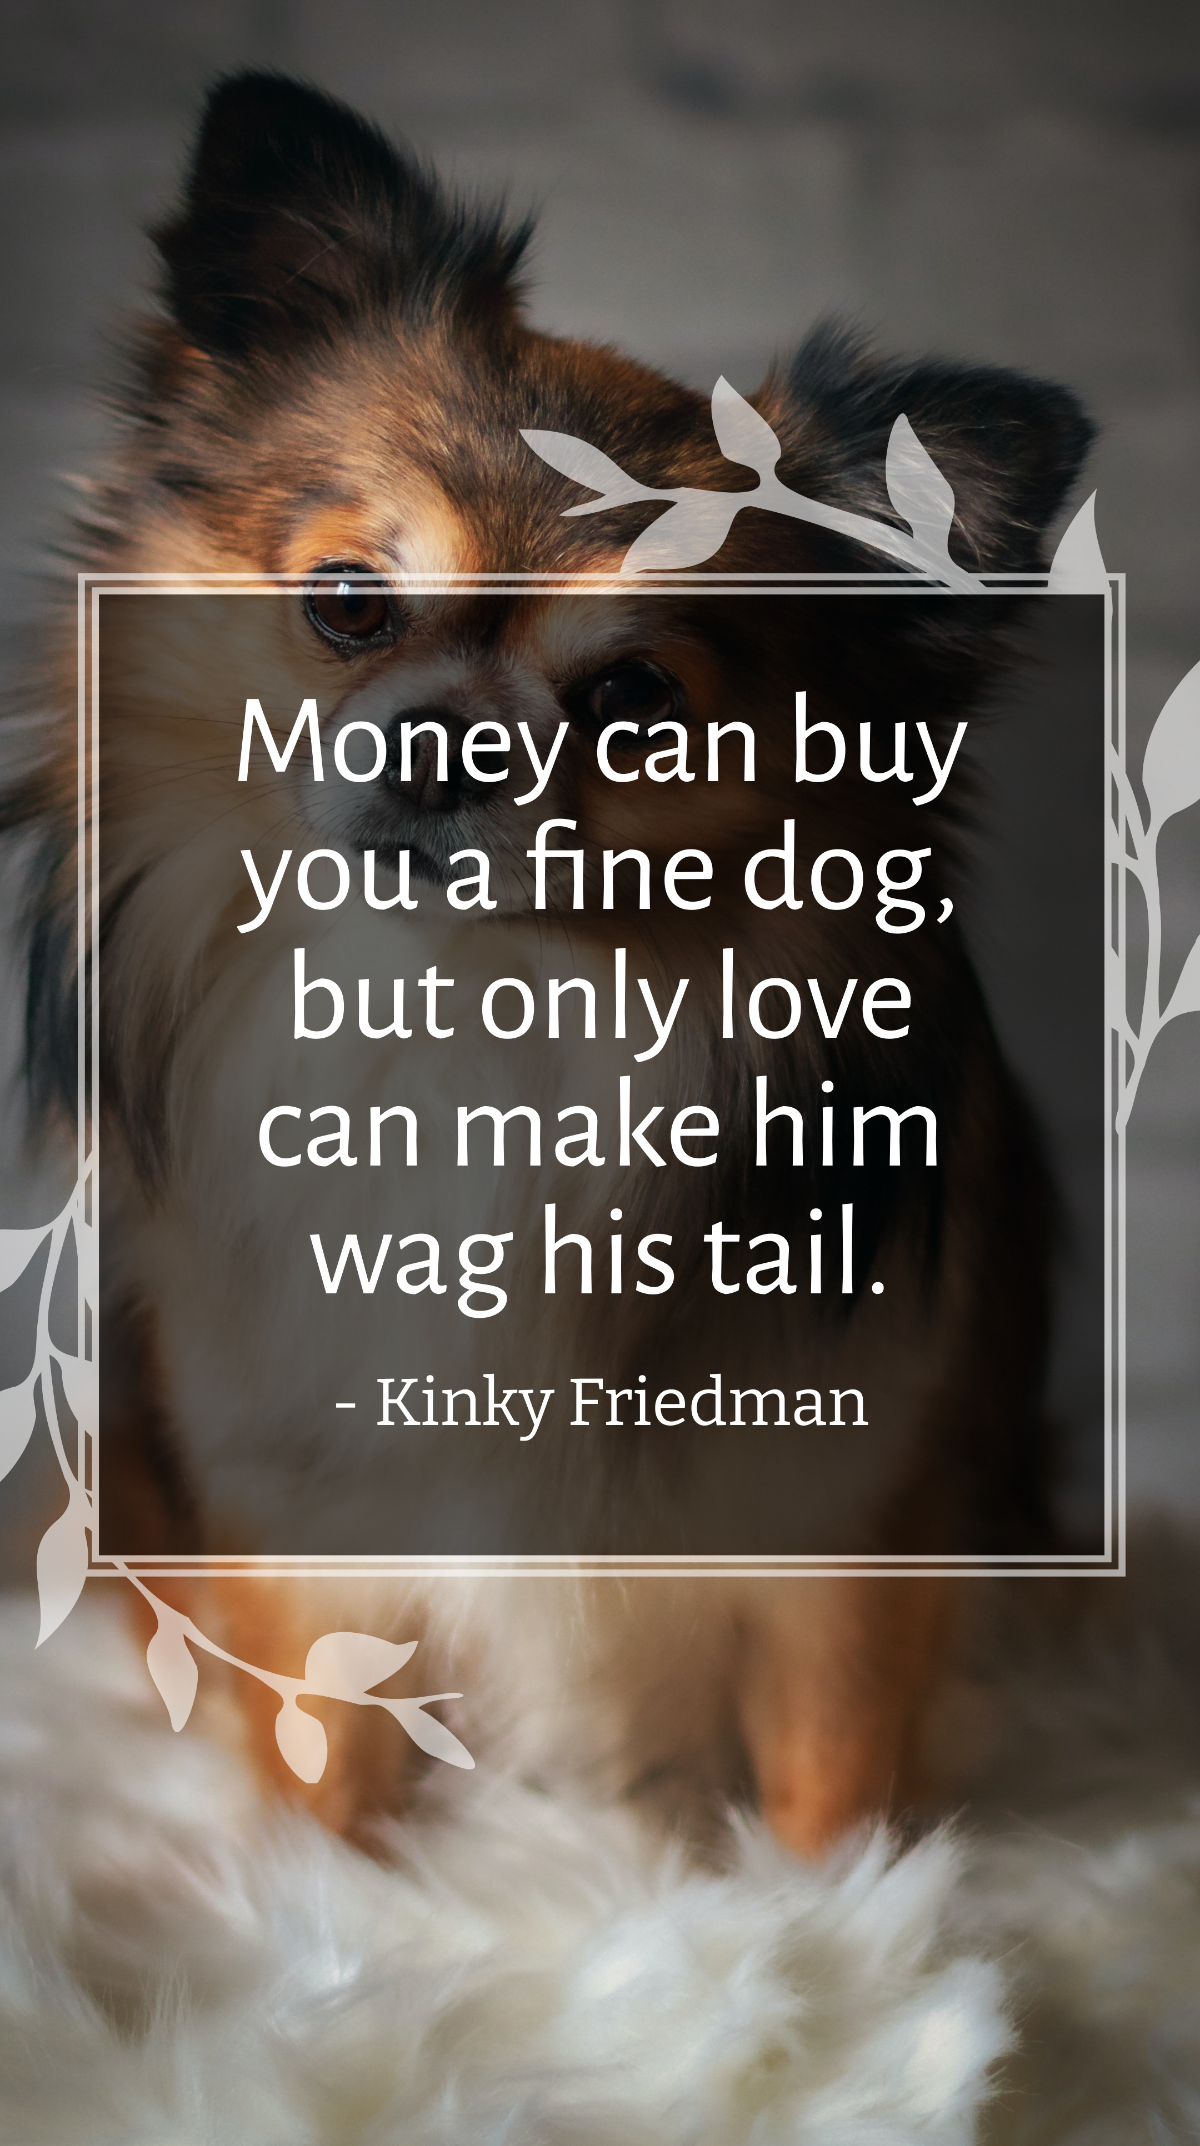 Kinky Friedman - Money can buy you a fine dog, but only love can make him wag his tail. Template